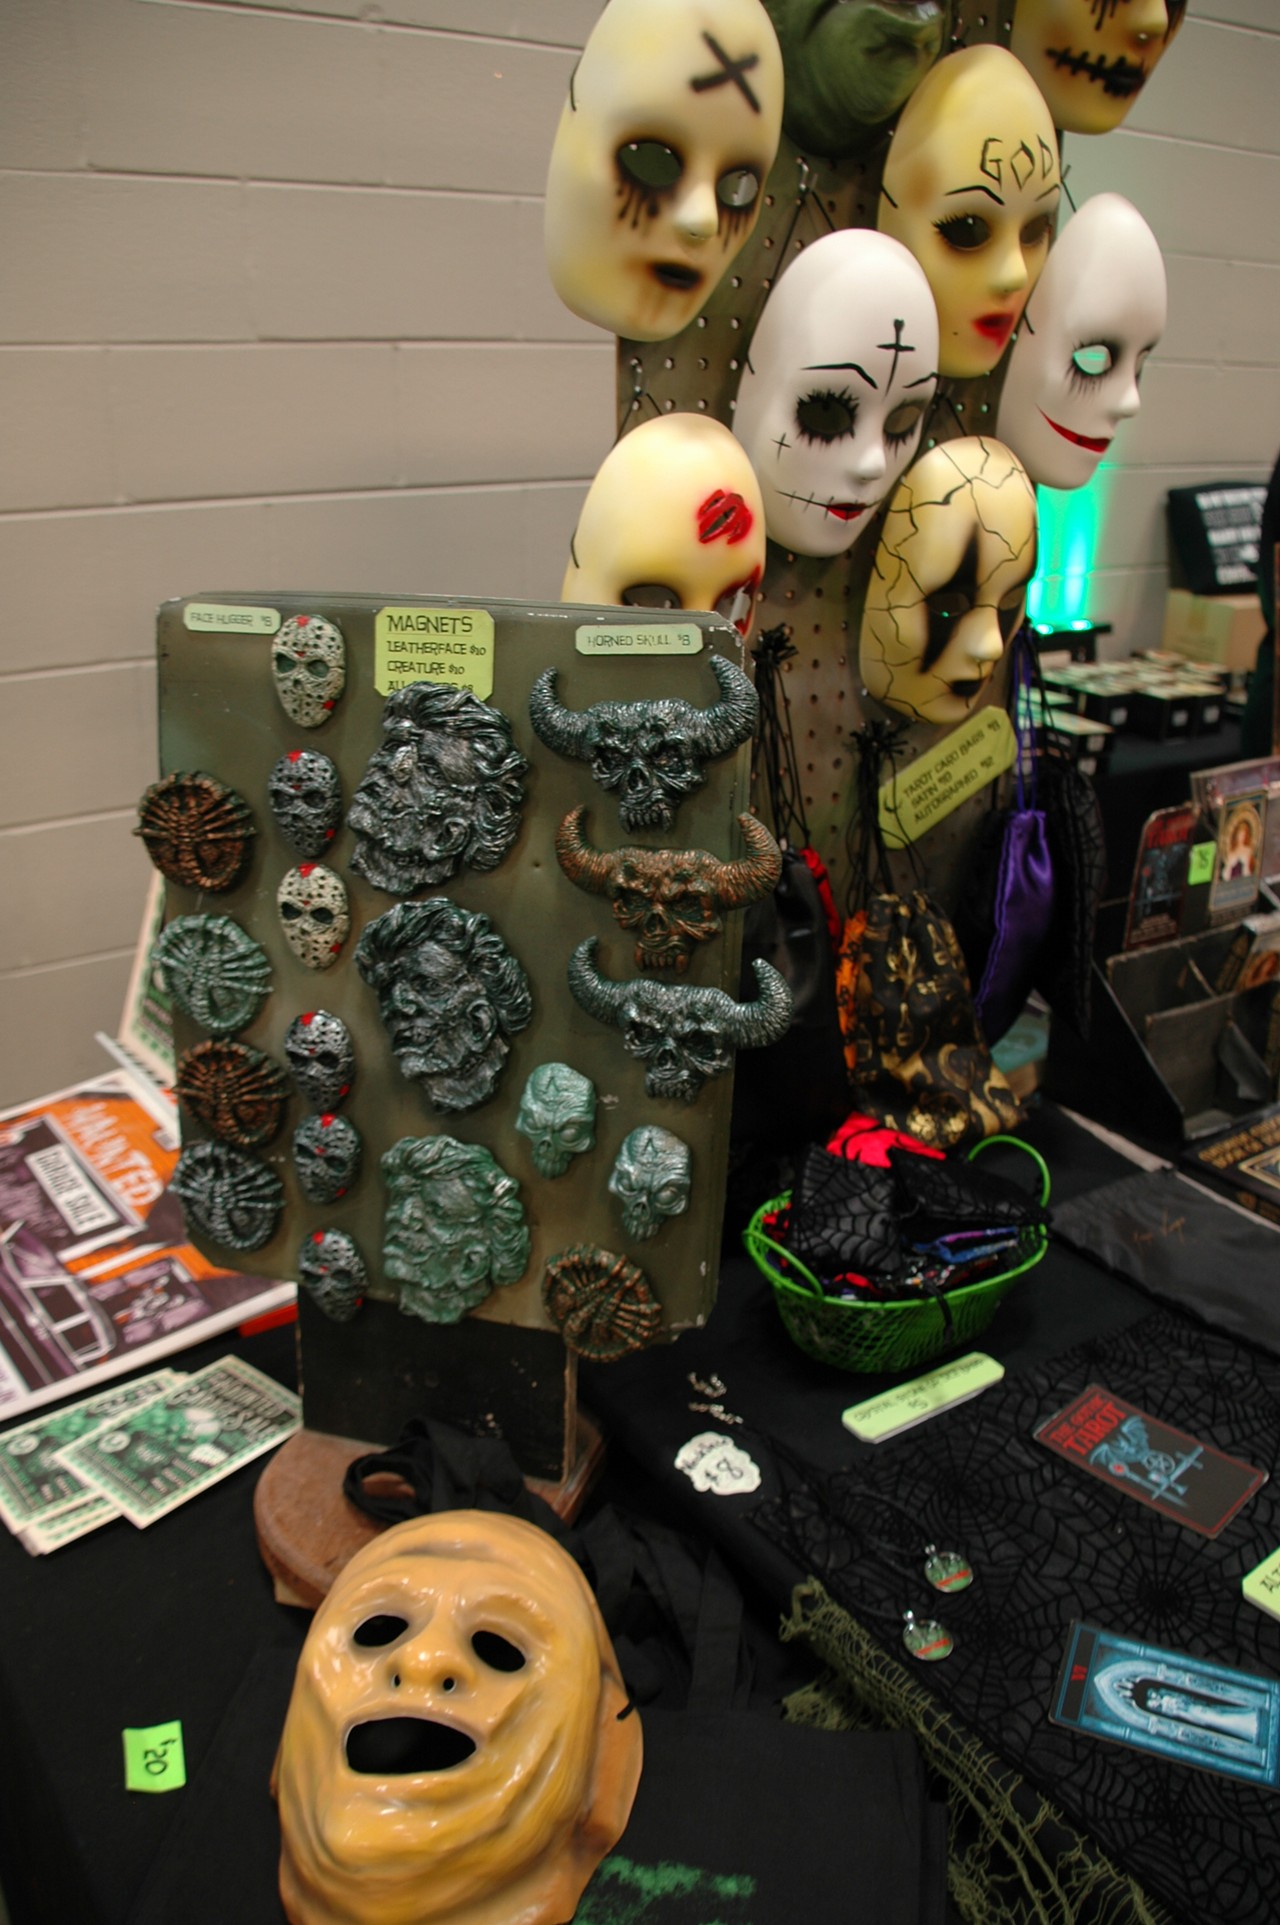 Masks and other apparel were among the most popular items for sale from the conventions many vendors.